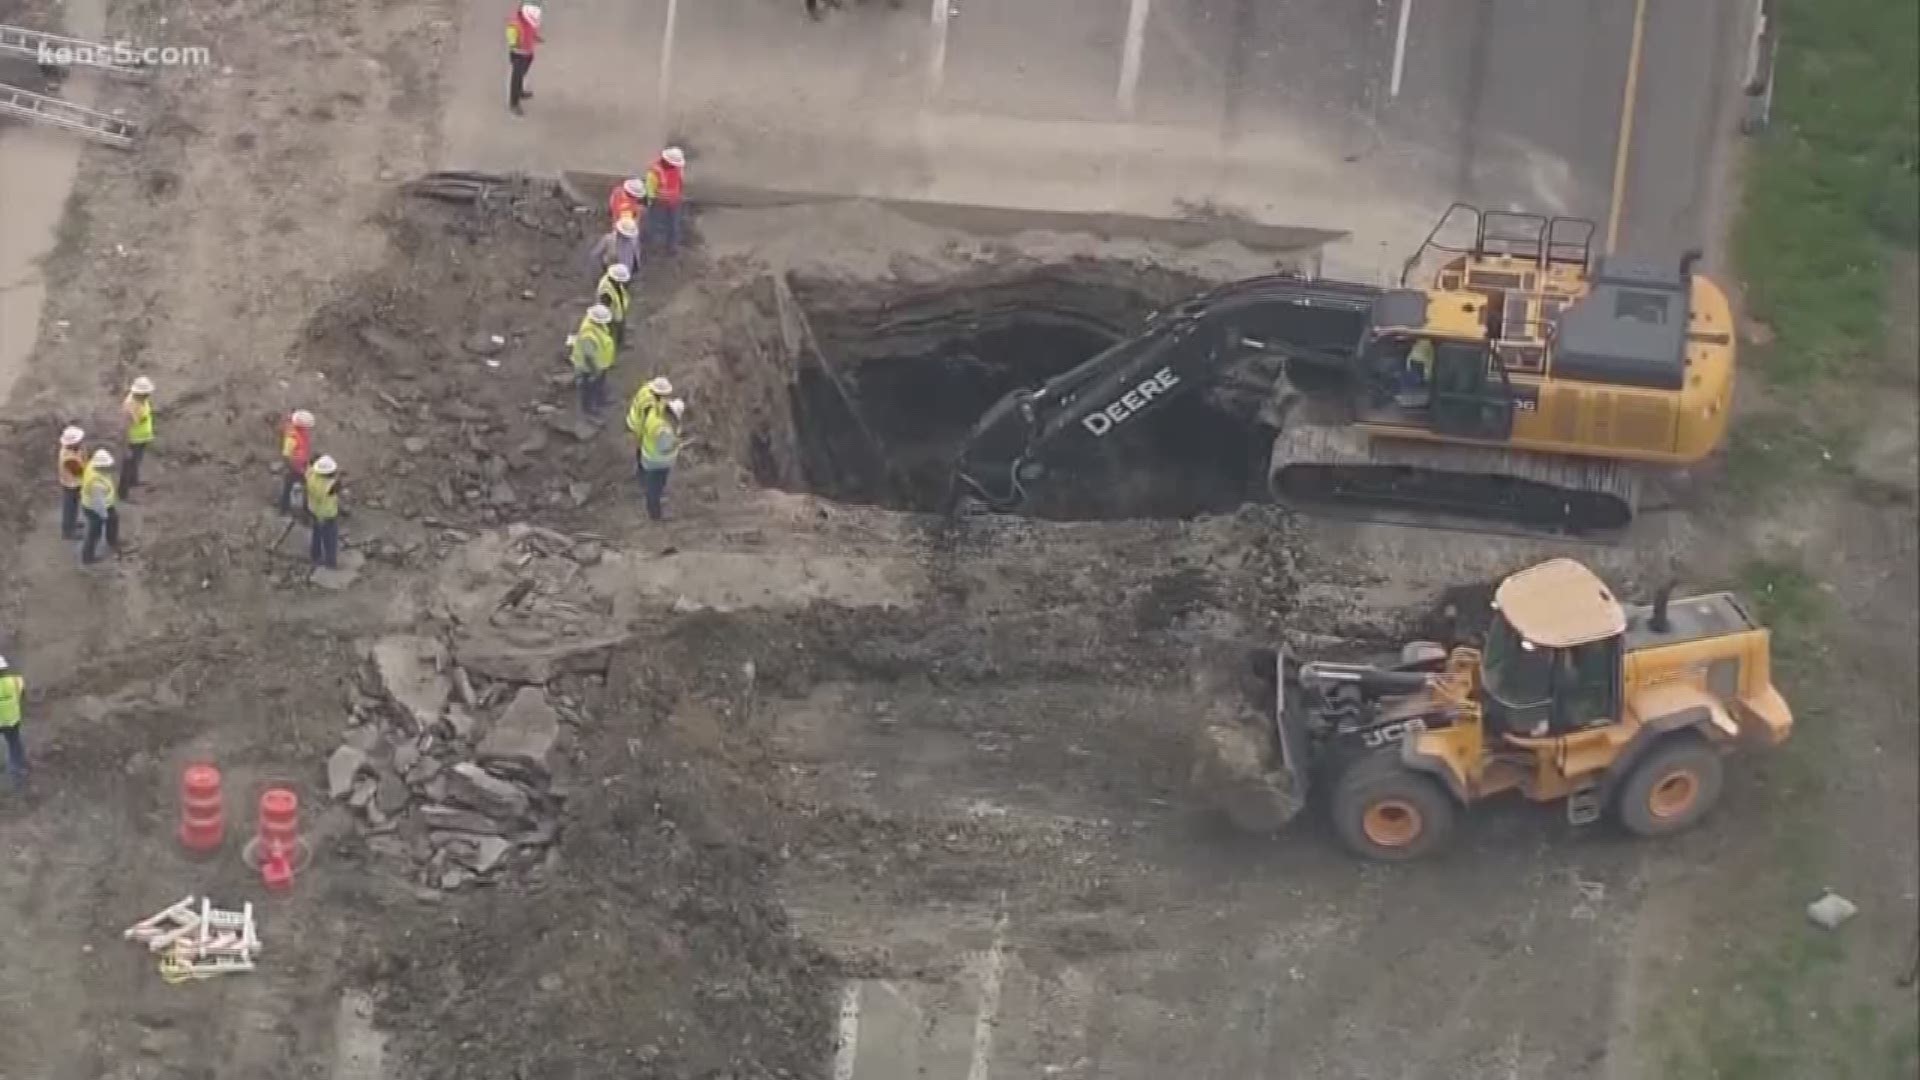 A collapsed sewer line is to blame for the sinkhole that has shut down all westbound main lanes of US-90.